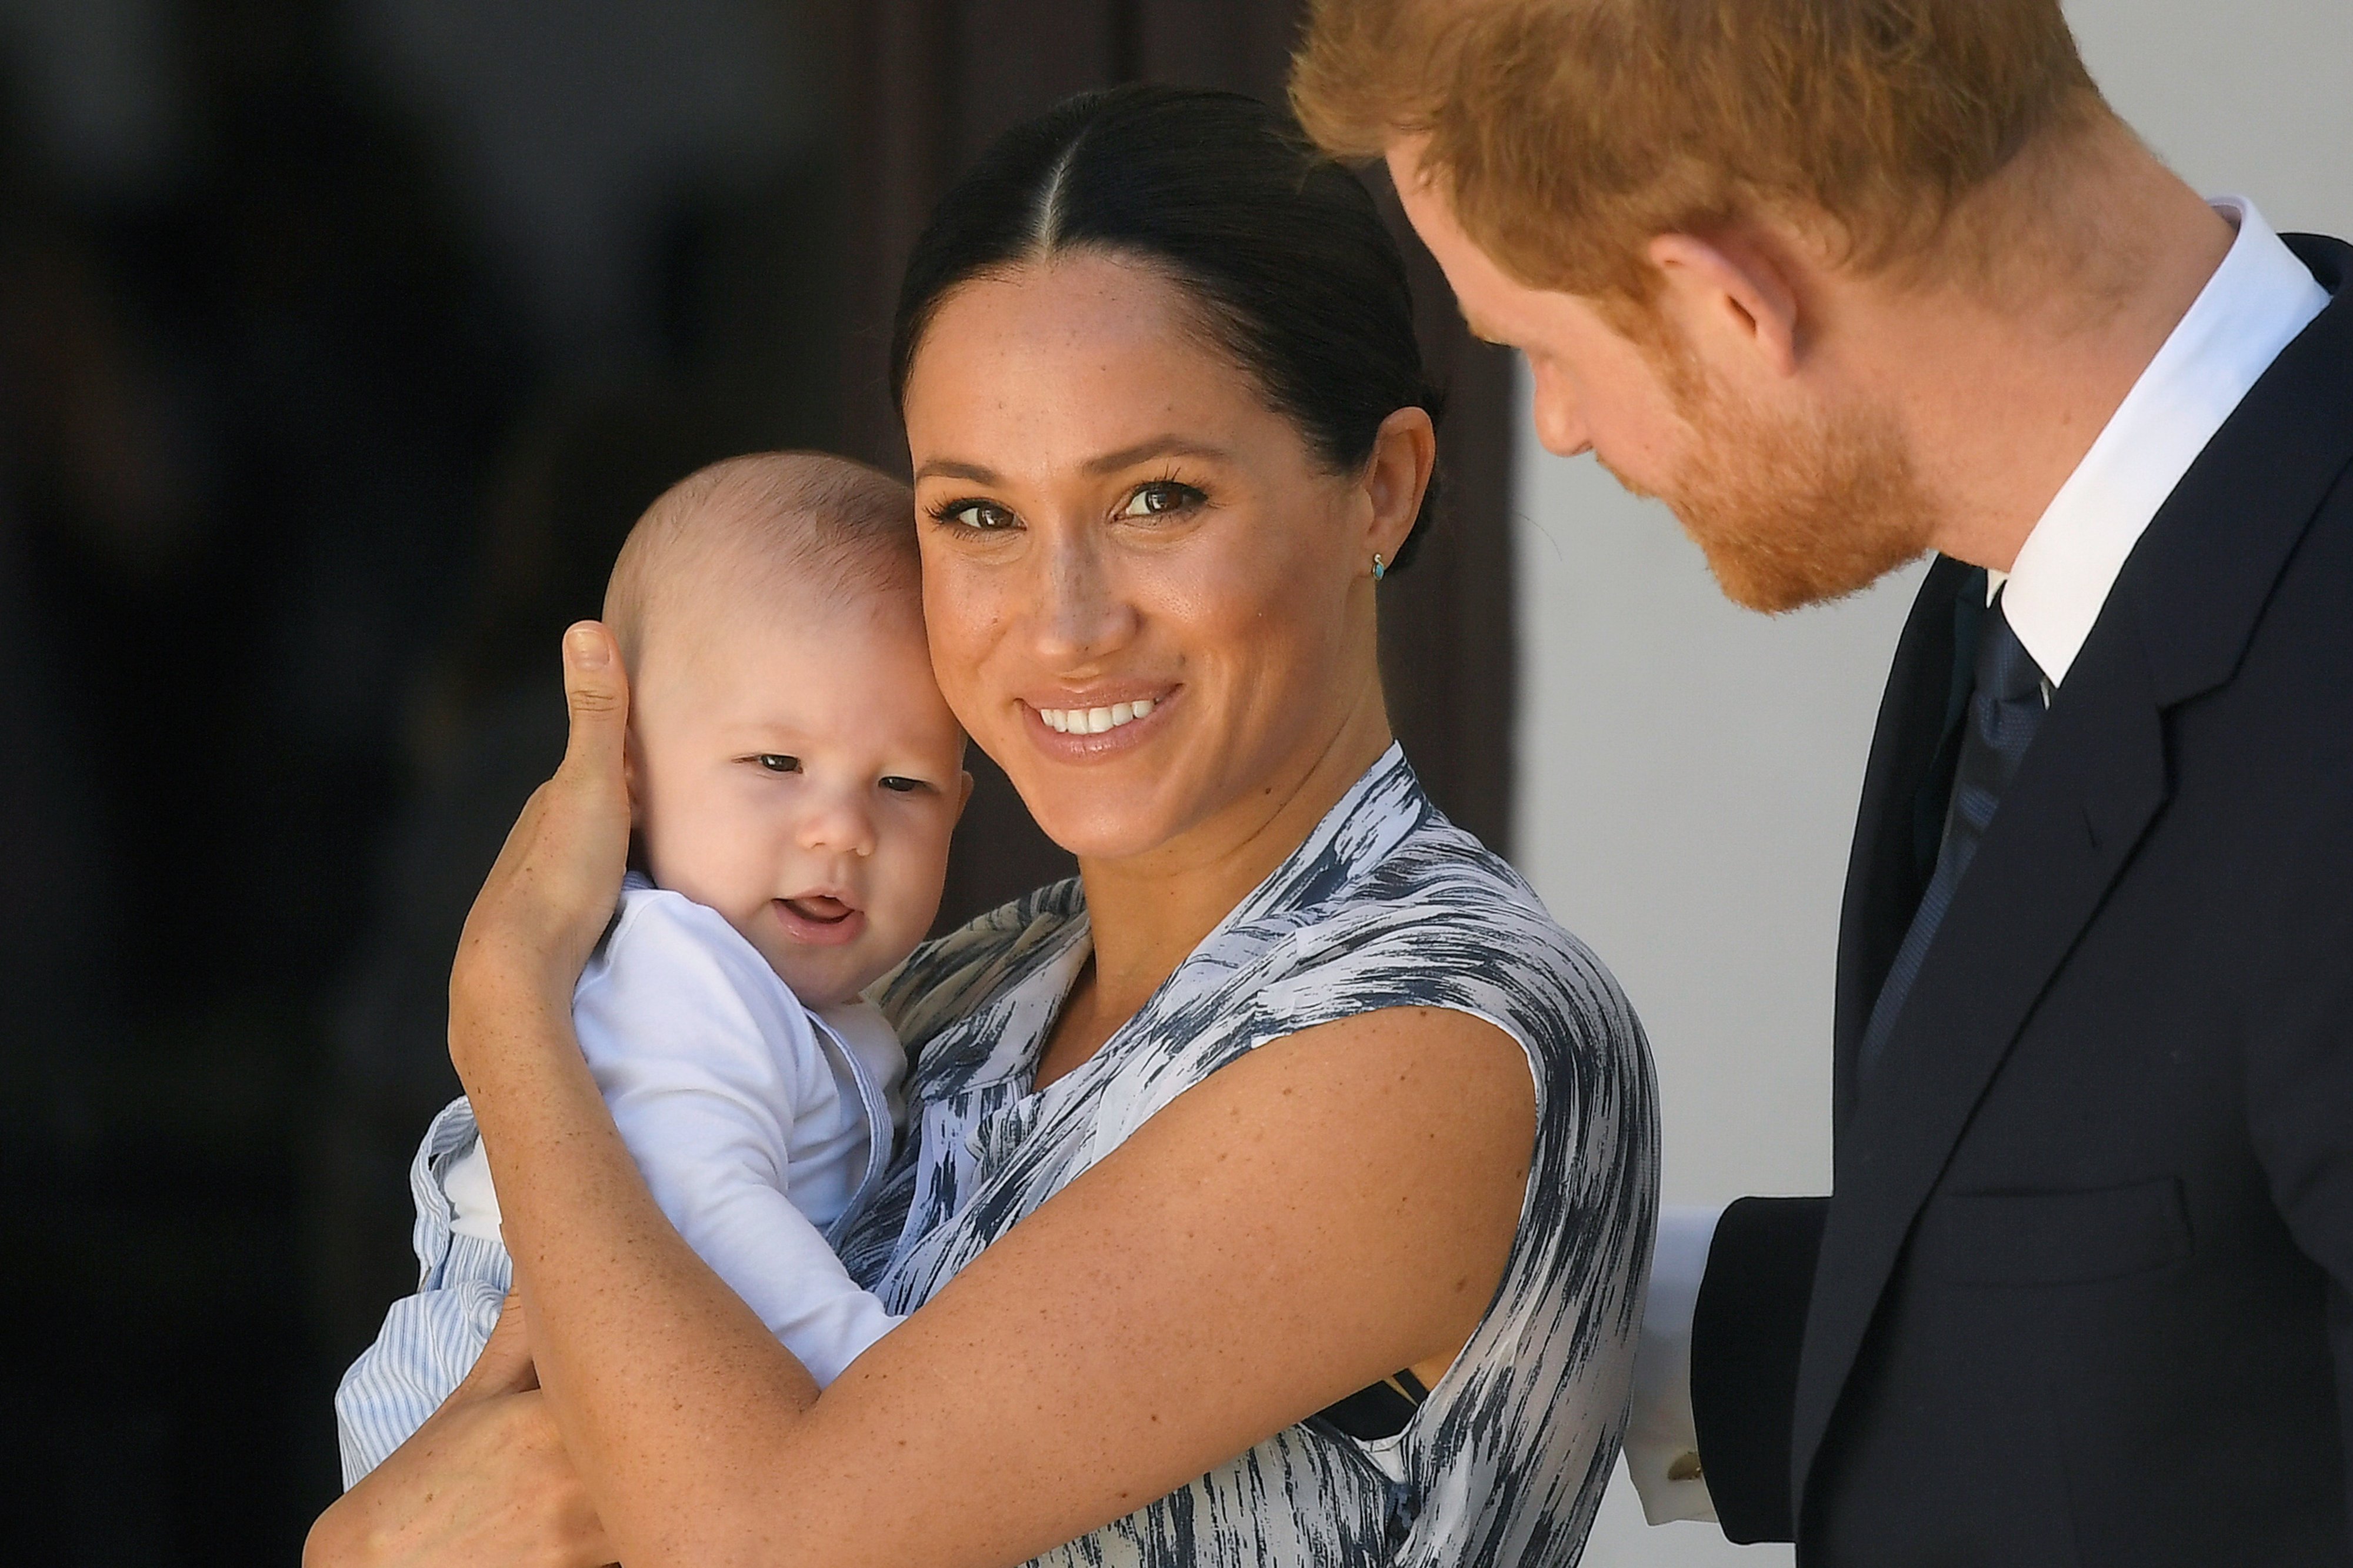 Prince Harry, Duke of Sussex and Meghan, Duchess of Sussex and their baby son Archie Mountbatten-Windsor at a meeting with Archbishop Desmond Tutu at the Desmond & Leah Tutu Legacy Foundation during their royal tour of South Africa on September 25, 2019 in Cape Town, South Africa. | Source: Getty Images